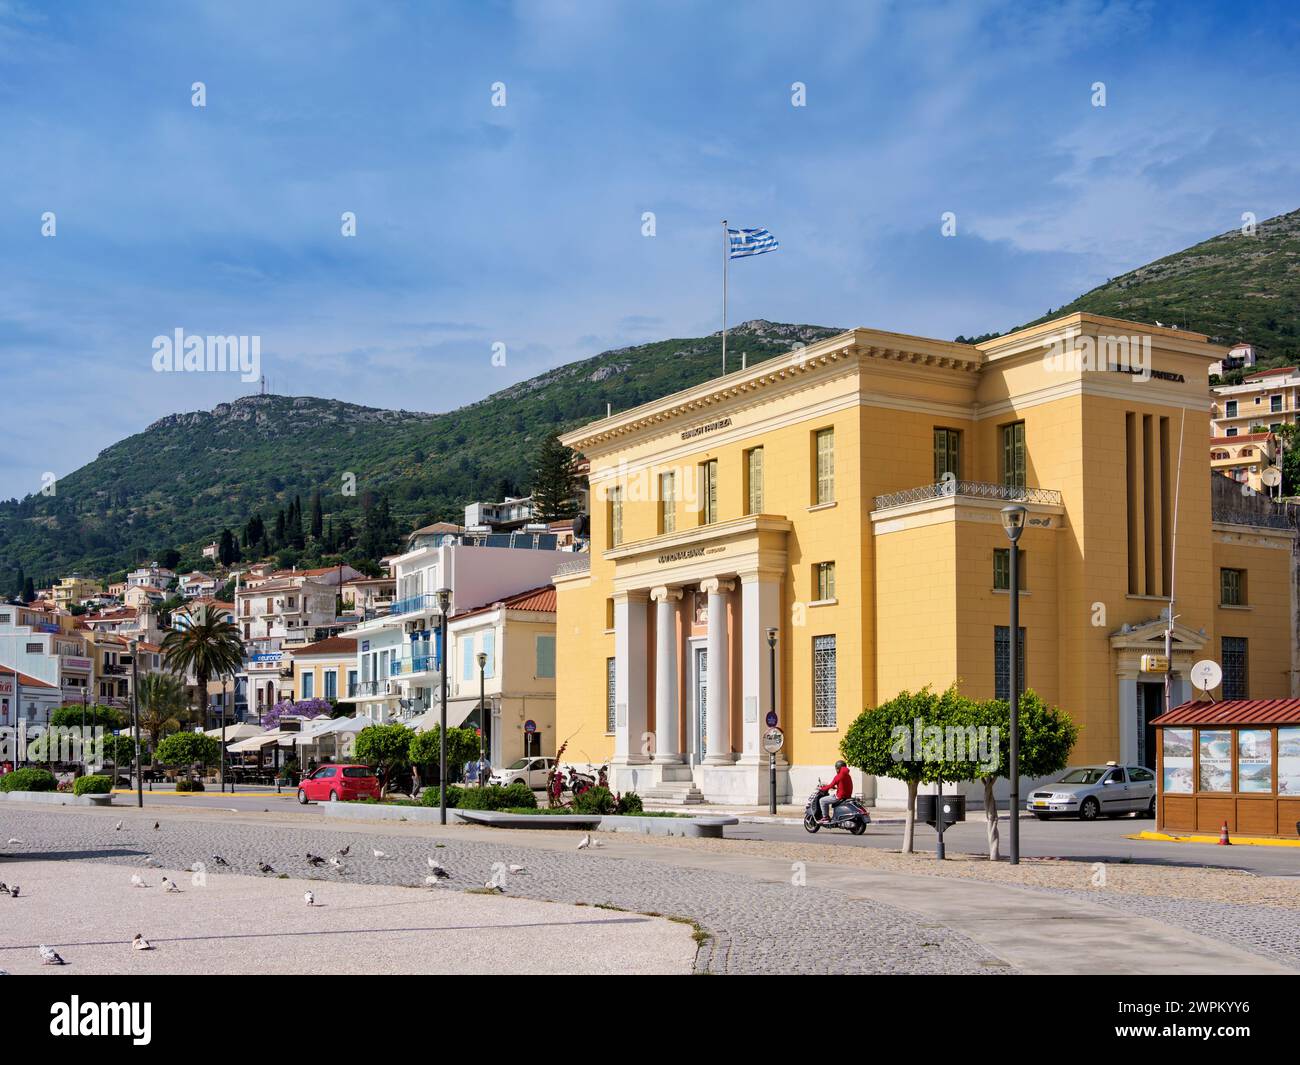 National Bank at the Waterfront, Samos Town, Samos Island, Egeo settentrionale, Isole greche, Grecia, Europa Foto Stock